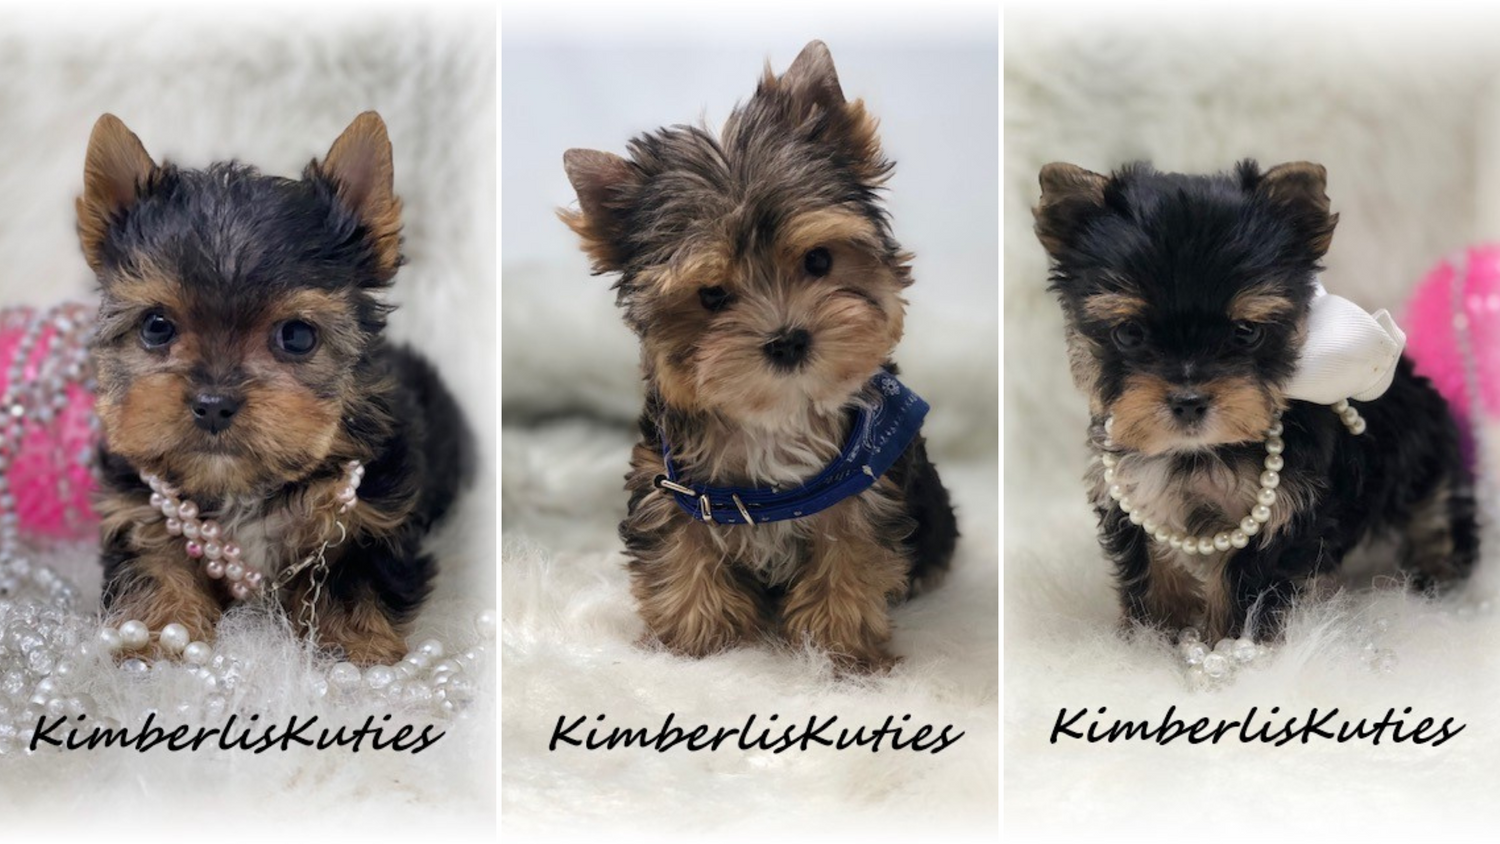 Kimberli's Kuties is a licensed breeder in Texas. Kimberli breeds designer puppies and prides herself on being a top yorkshire breeders in the state of Texas.